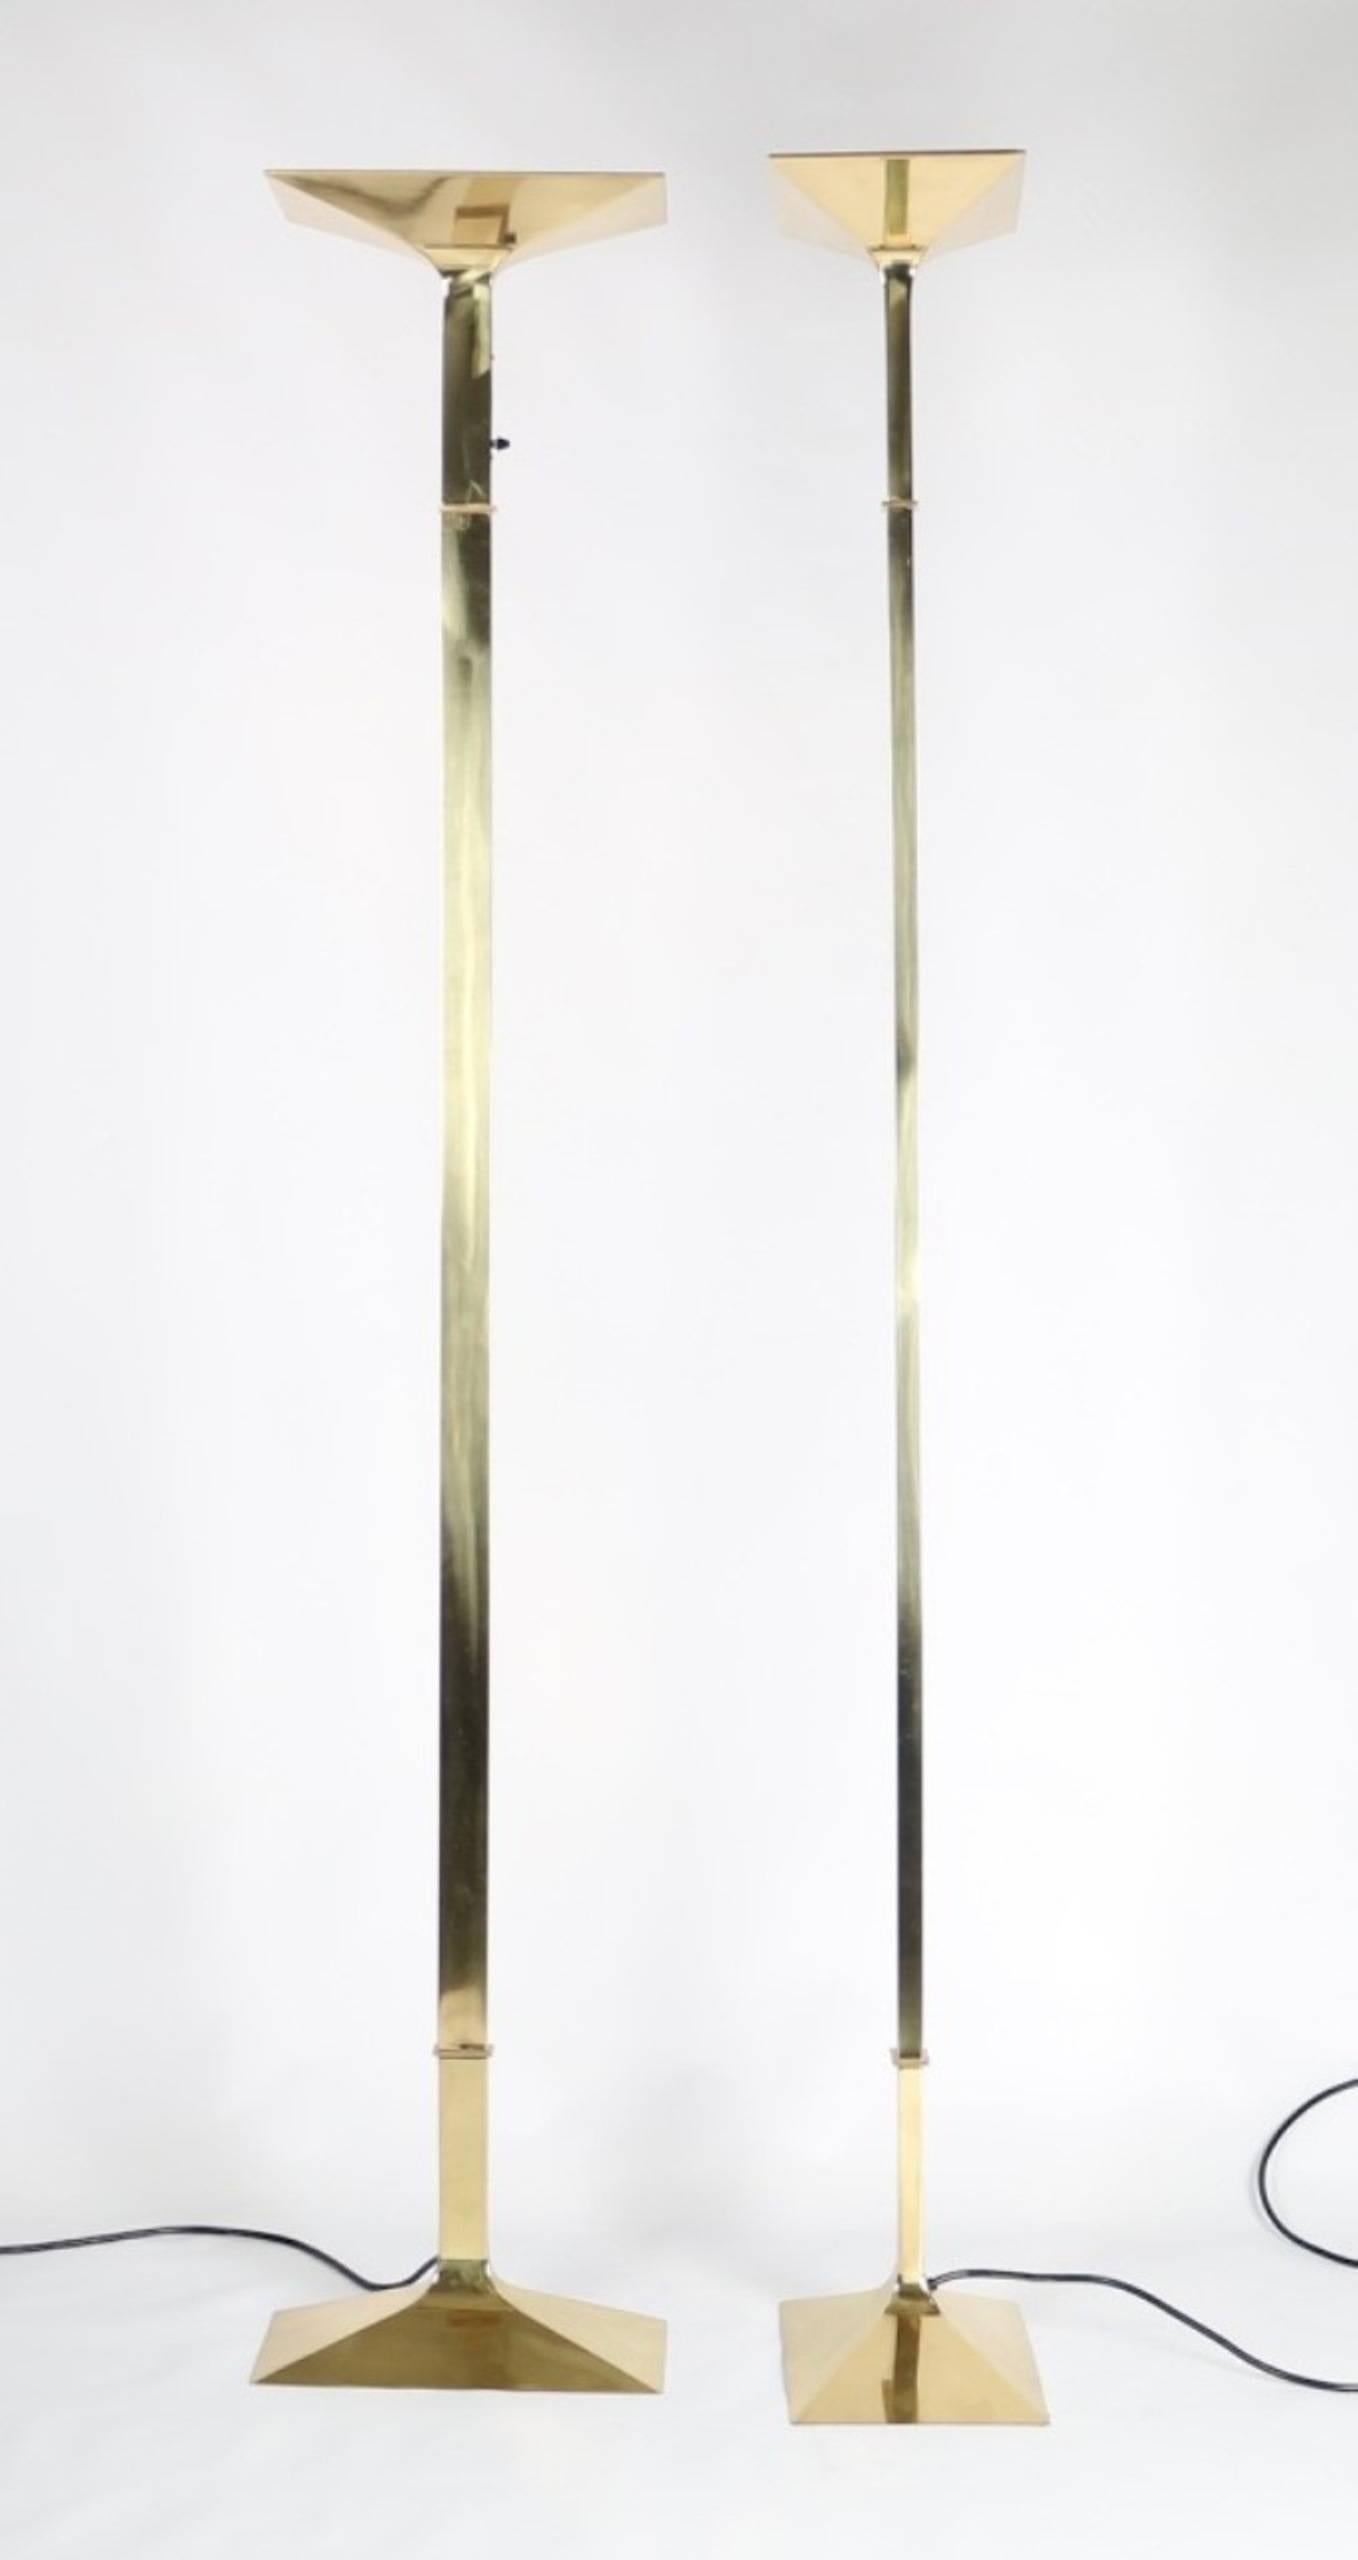 Italian Hollywood Regency brass torchiere floor lamps with dimmer. These lamps have been fully restored and include a halogen bulb. Each is in excellent vintage condition and has wear consistent with age and use.